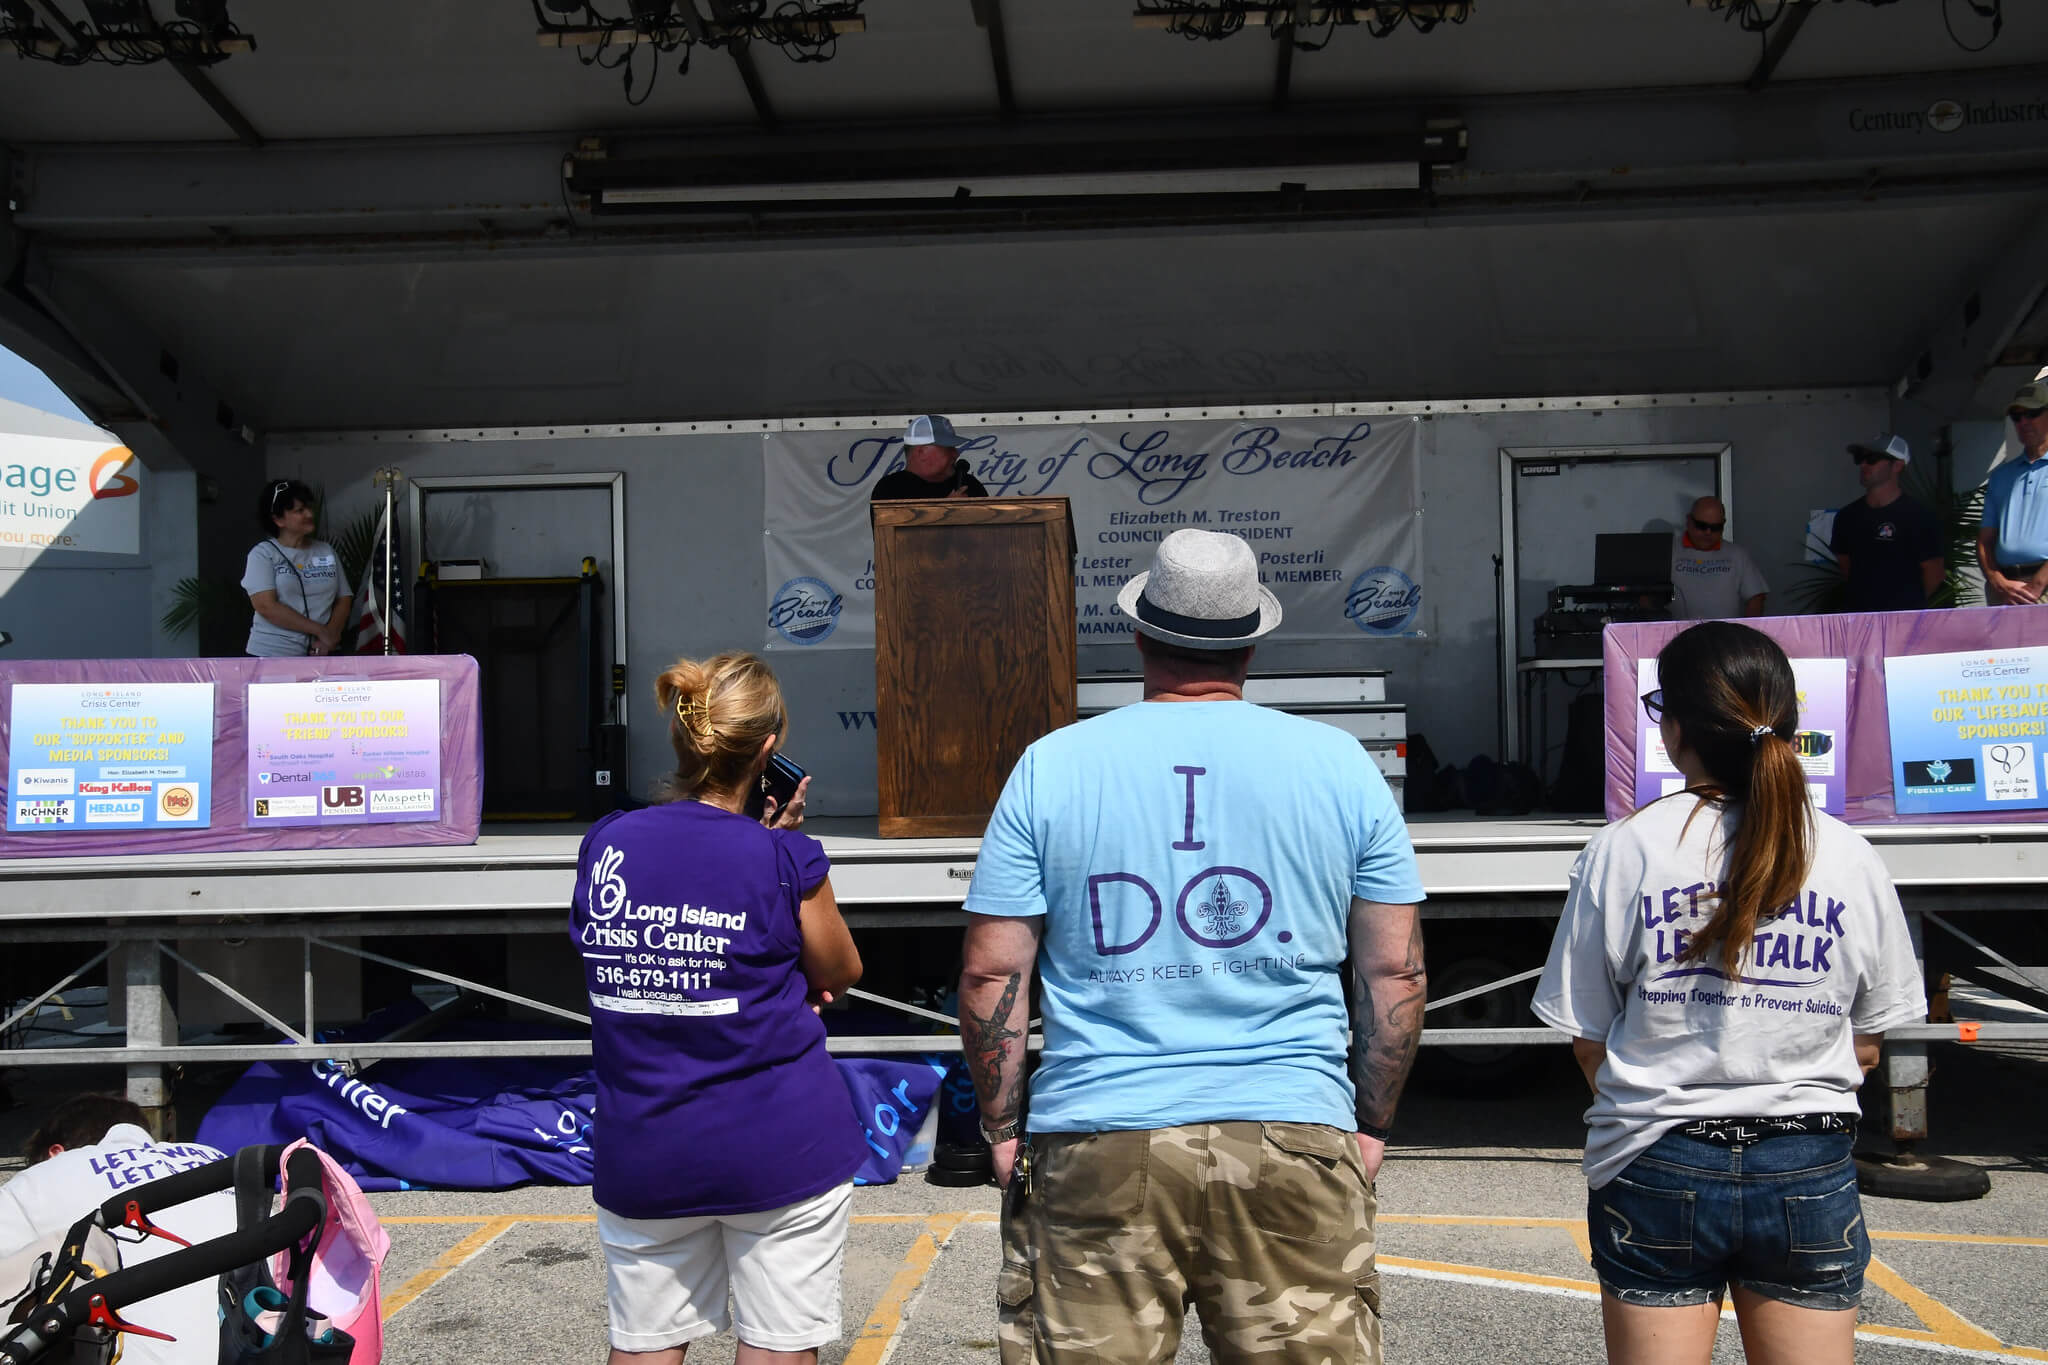 Image 17 14th Annual Lets Walk Lets Talk Stepping Together to Prevent Suicide event